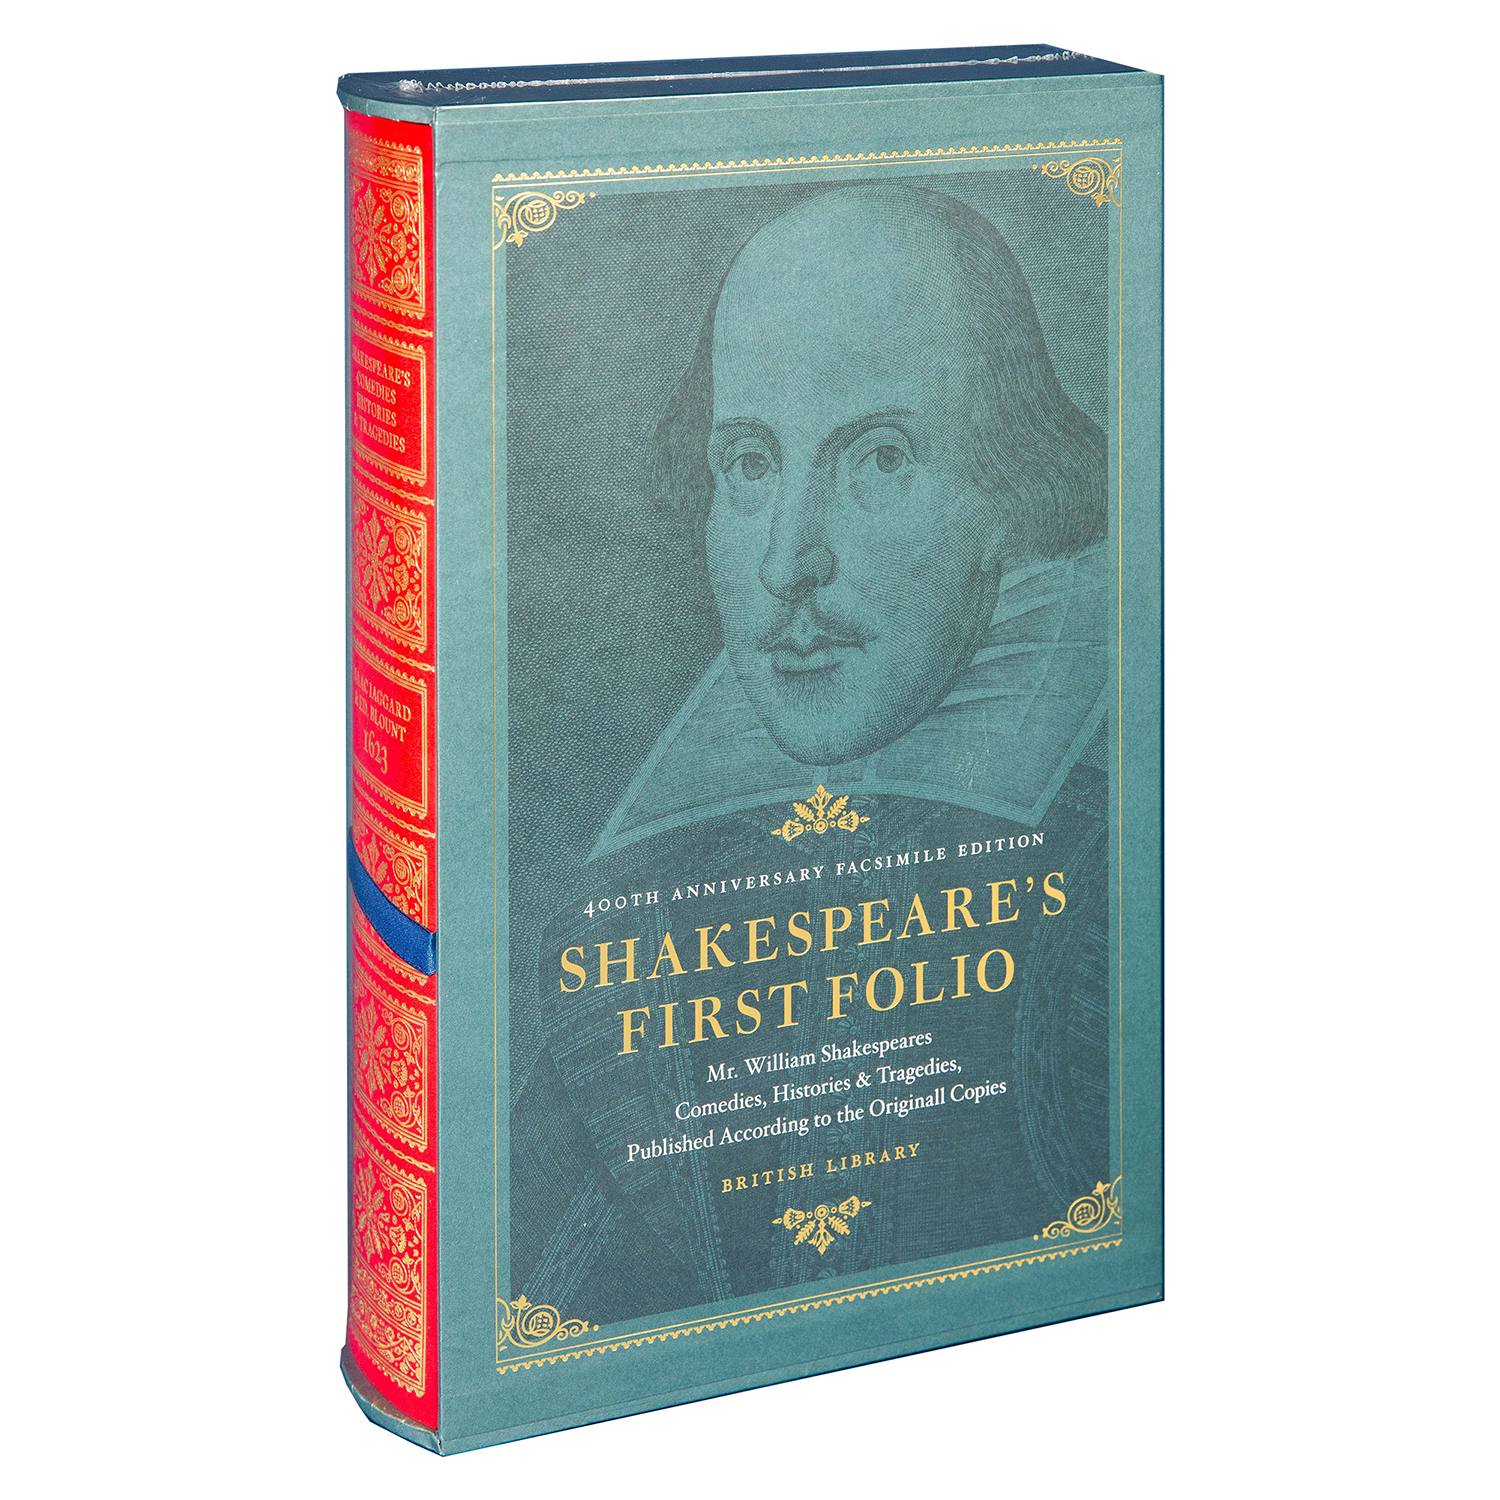 Image of cover of Shakespeare's First Folio Facsimile